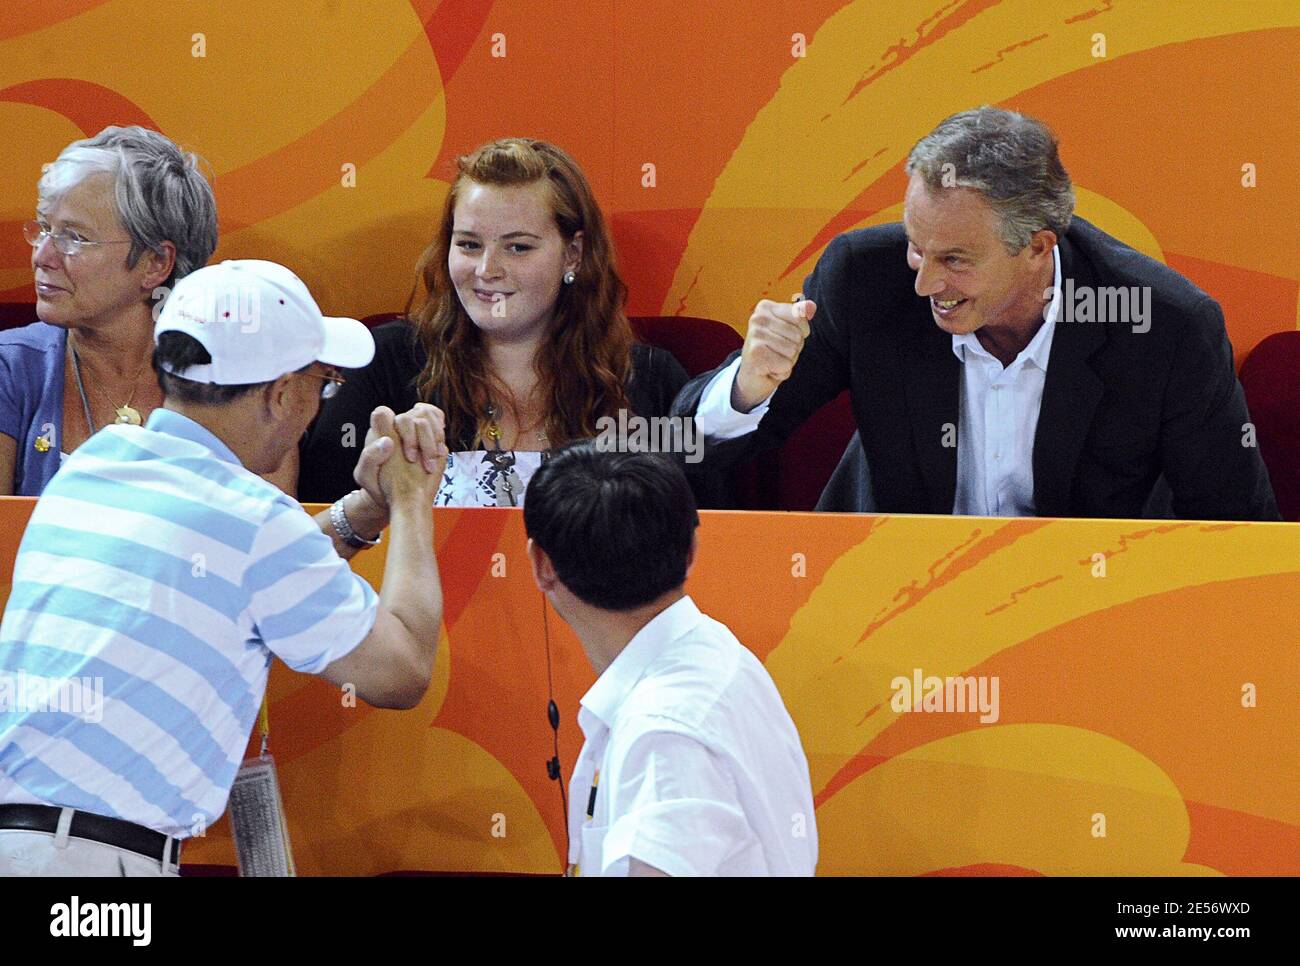 Former prime minister Tony Blair with Daughter Kathryn (L), Wife's mother Gail Booth and his son Leo support UK Cyclist team during the Beijing Olympic Games 2008, China on August 19, 2008. Photo by Gouhier-Hahn-Nebinger/ABACAPRESS.COM Stock Photo